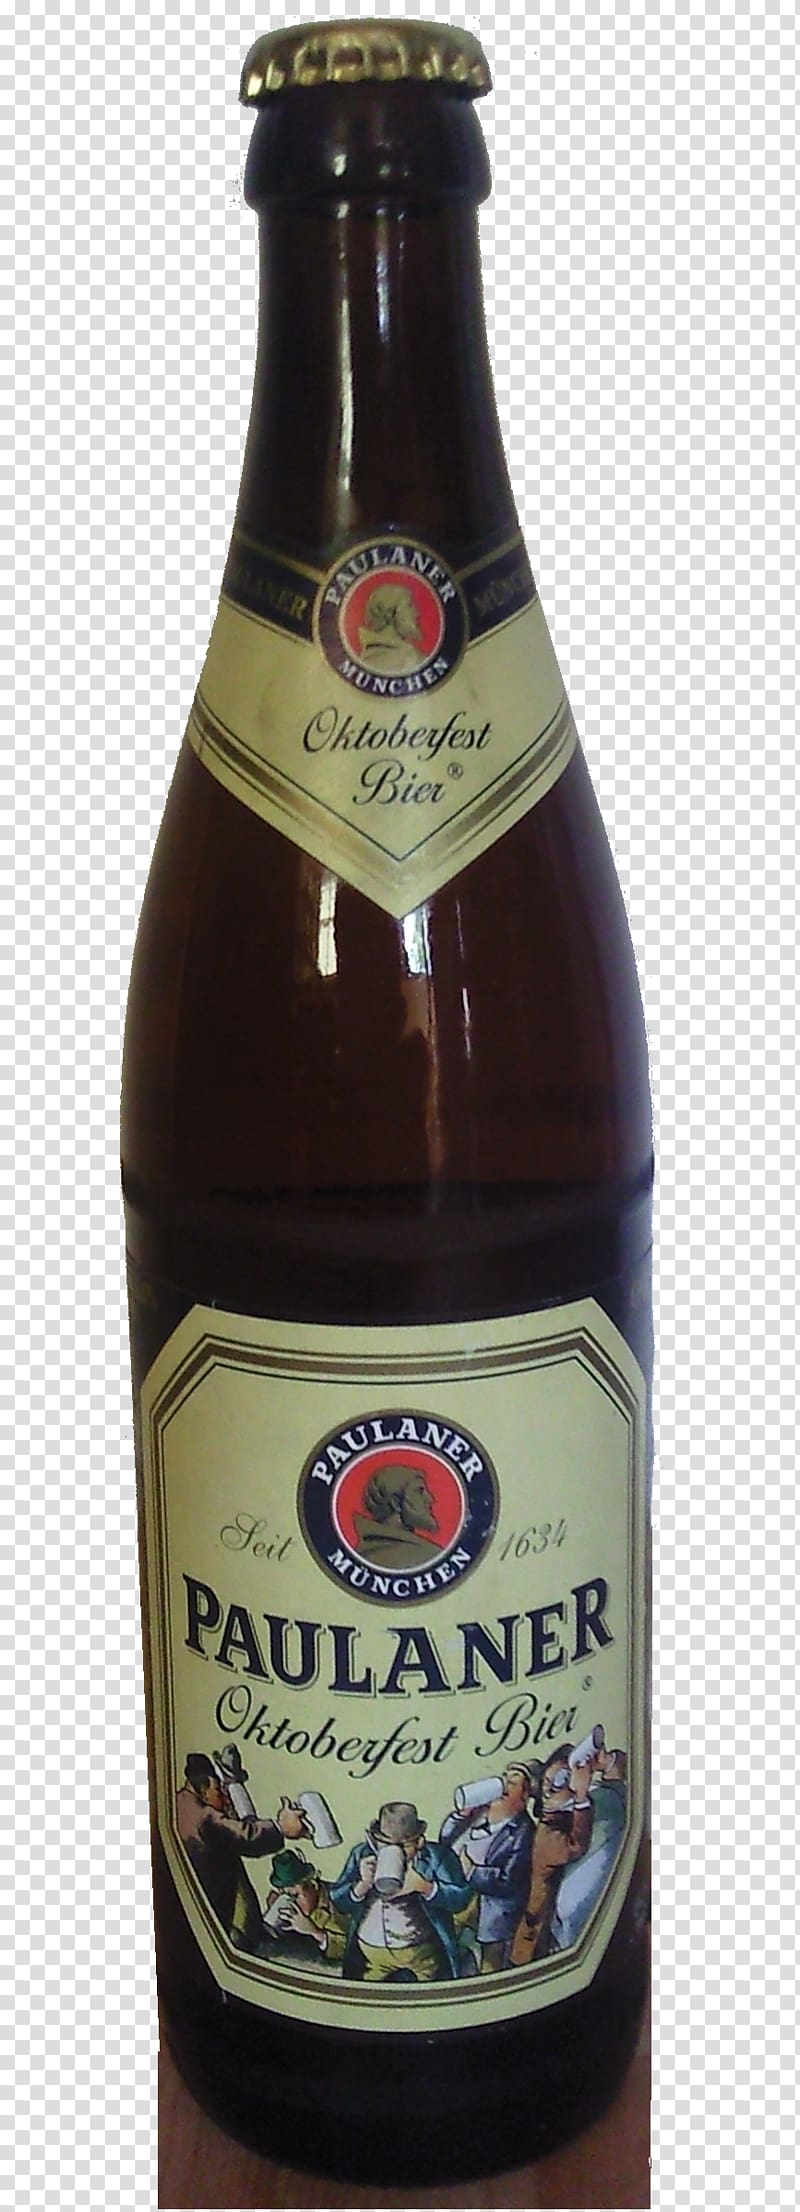 Ale Beer bottle Paulaner Brewery Wheat beer, beer transparent background PNG clipart